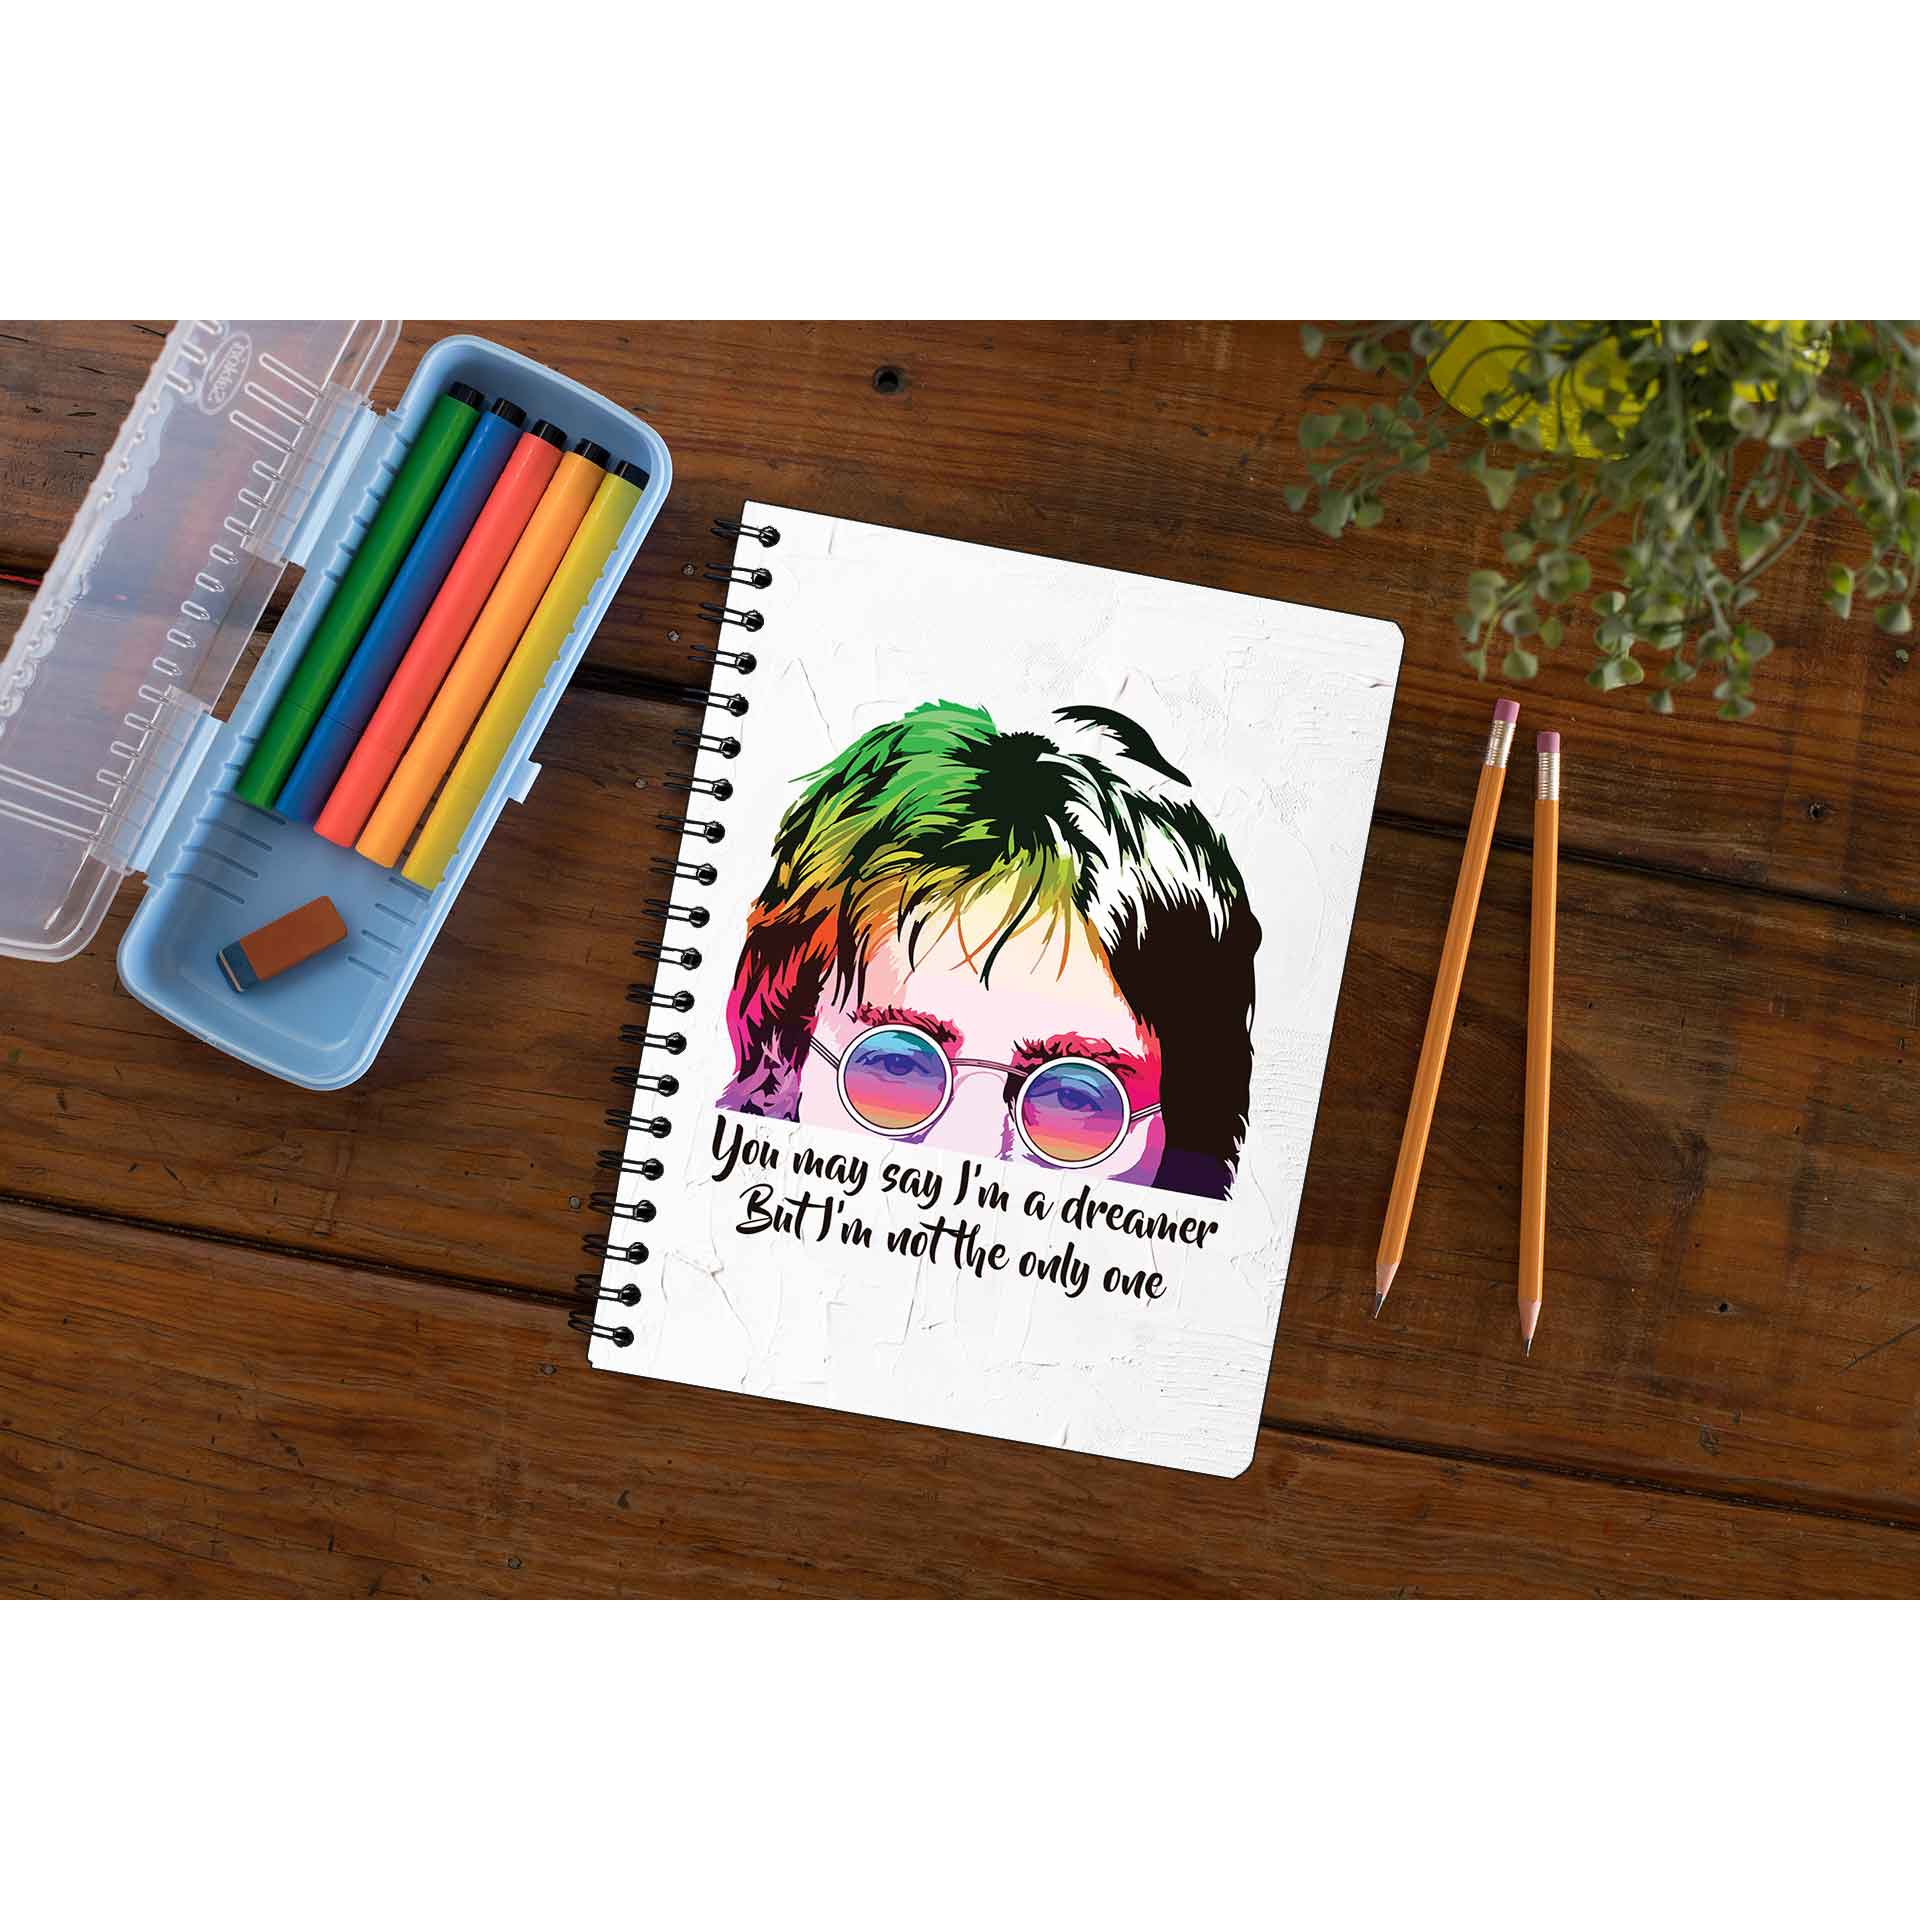 The Beatles Notebook - Dreamer Notebook The Banyan Tee TBT Notepad paper online diary personal girls cute office under 100